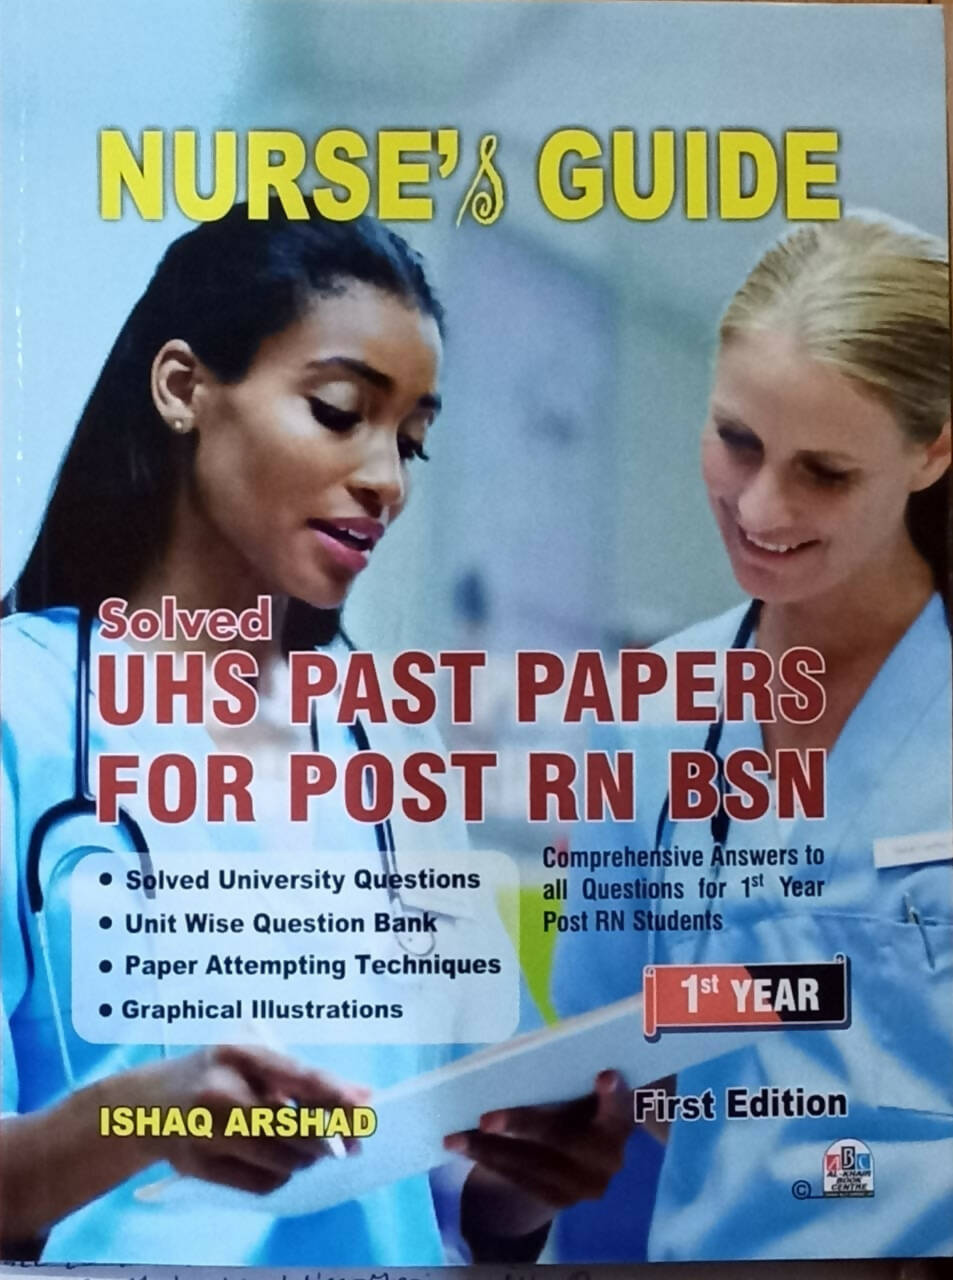 Nurse And Guide Solved UHS Past Papers For Post RN BSN Ishaq Arshad Nurse And Guide Solved UHS Past Papers For Post RN BSN ( bachelor of science in nursing) For 1st year Nursing Post RN Students, UHS NEW BOOKS N BOOKS